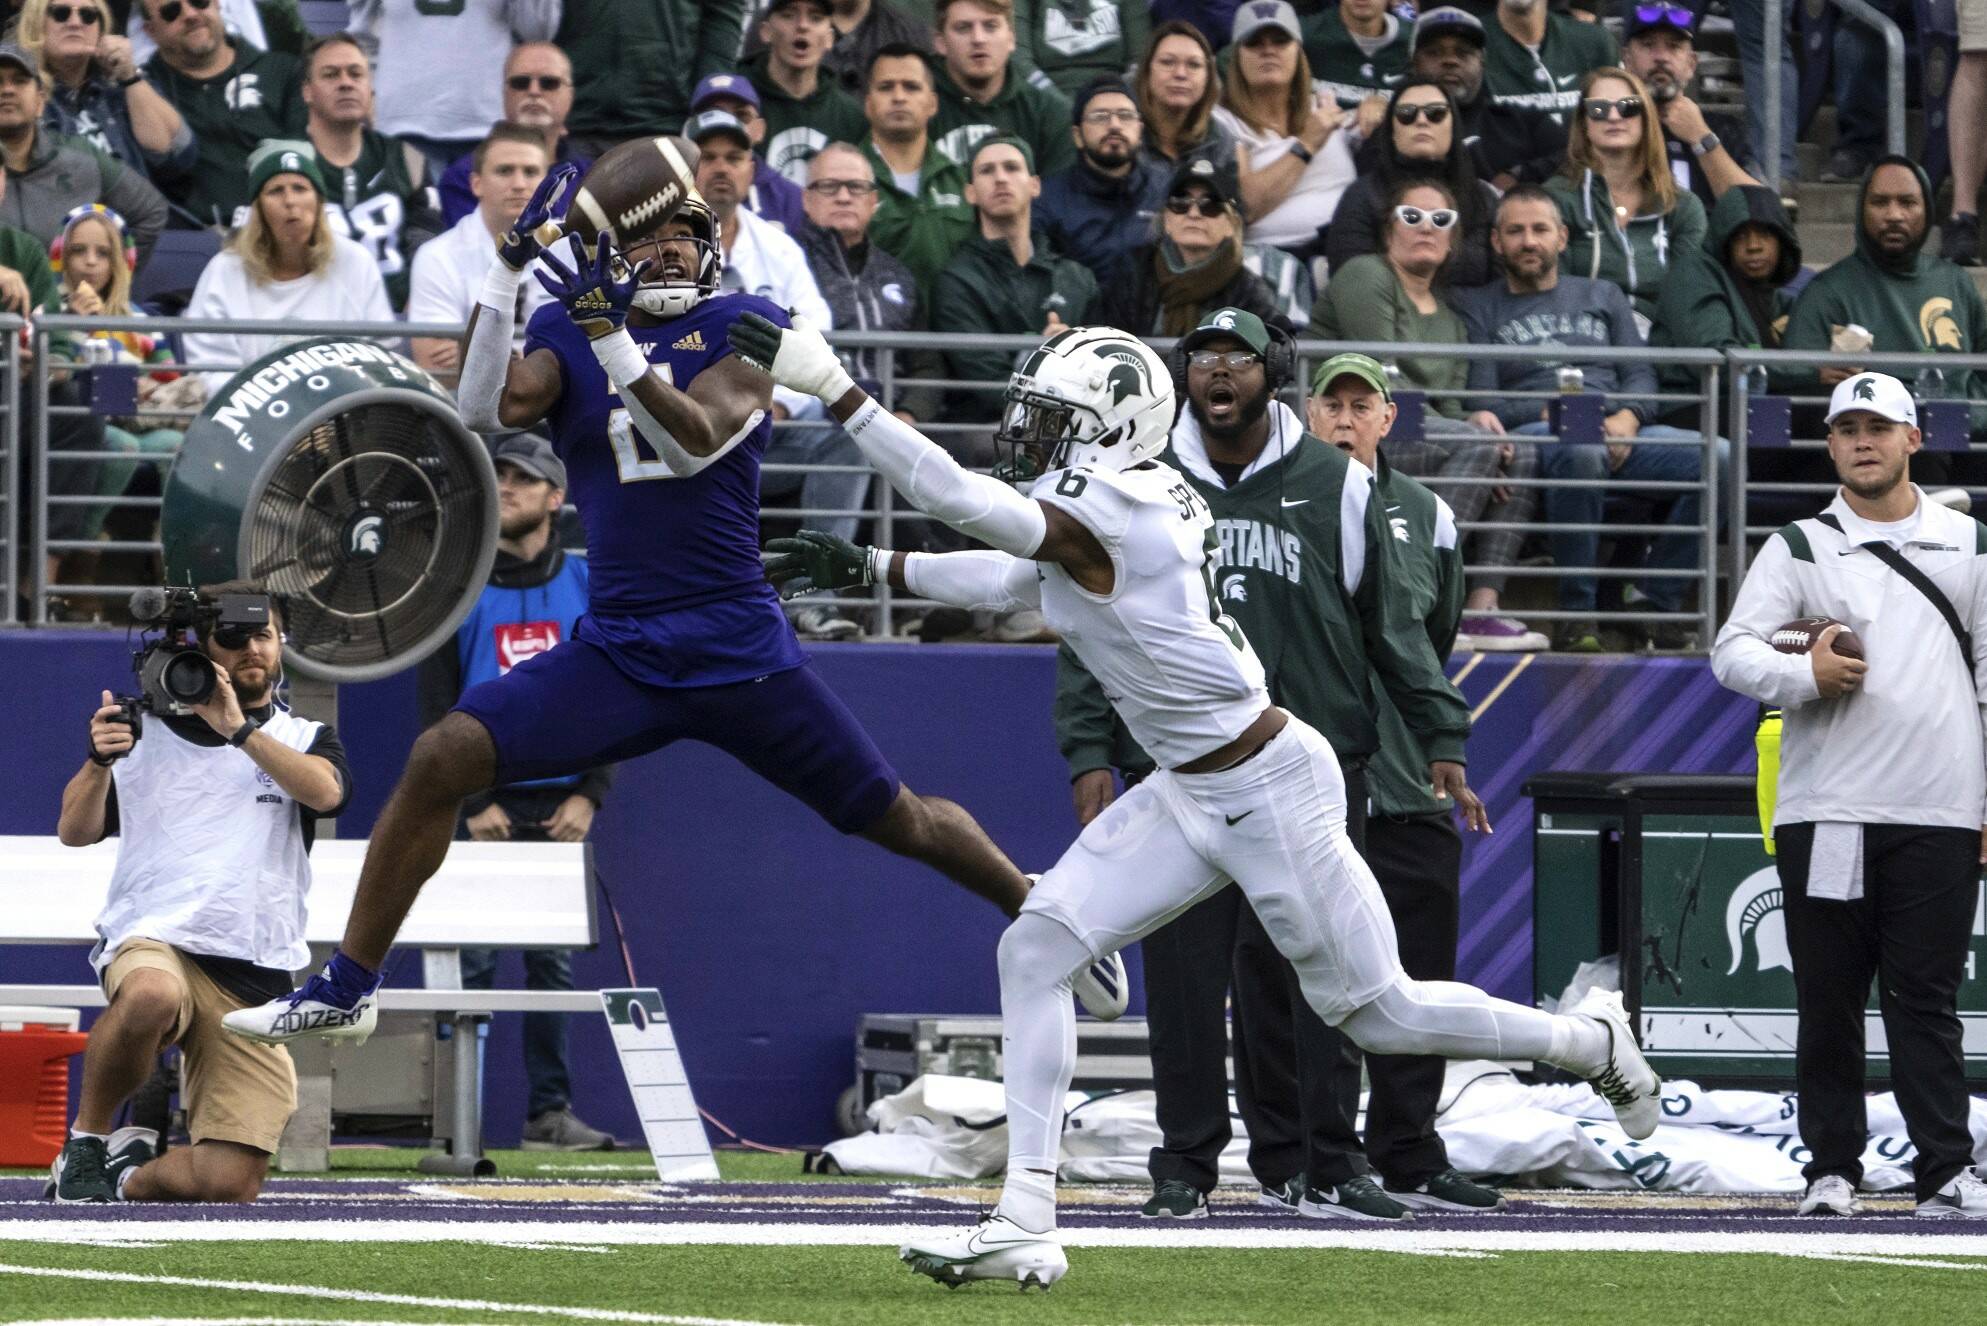 Washington wide receiever Ja’Lynn Polk, left, makes a reception against Michigan State defensive back Ameer Speed during the first half of an NCAA college football game, Saturday, Sept. 17, 2022, in Seattle. (AP Photo/Stephen Brashear)